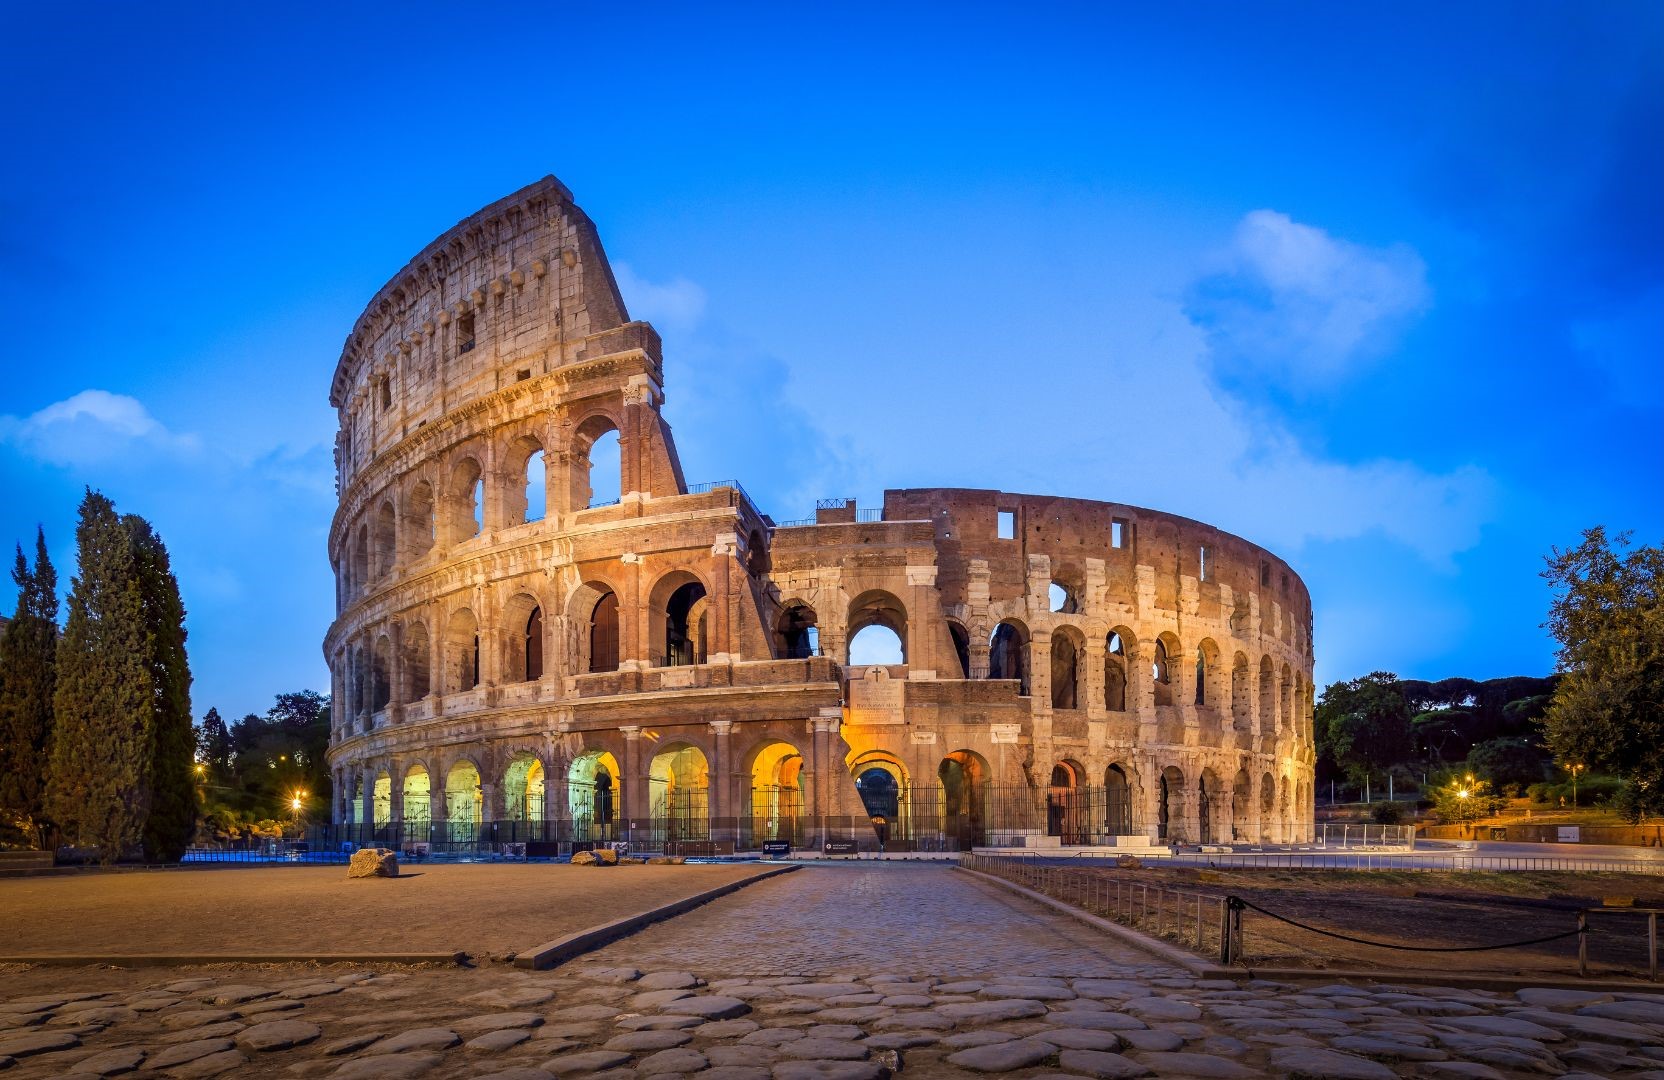 The Colosseum, Rome's iconic symbol of ancient gladiatorial battles and architectural prowess.